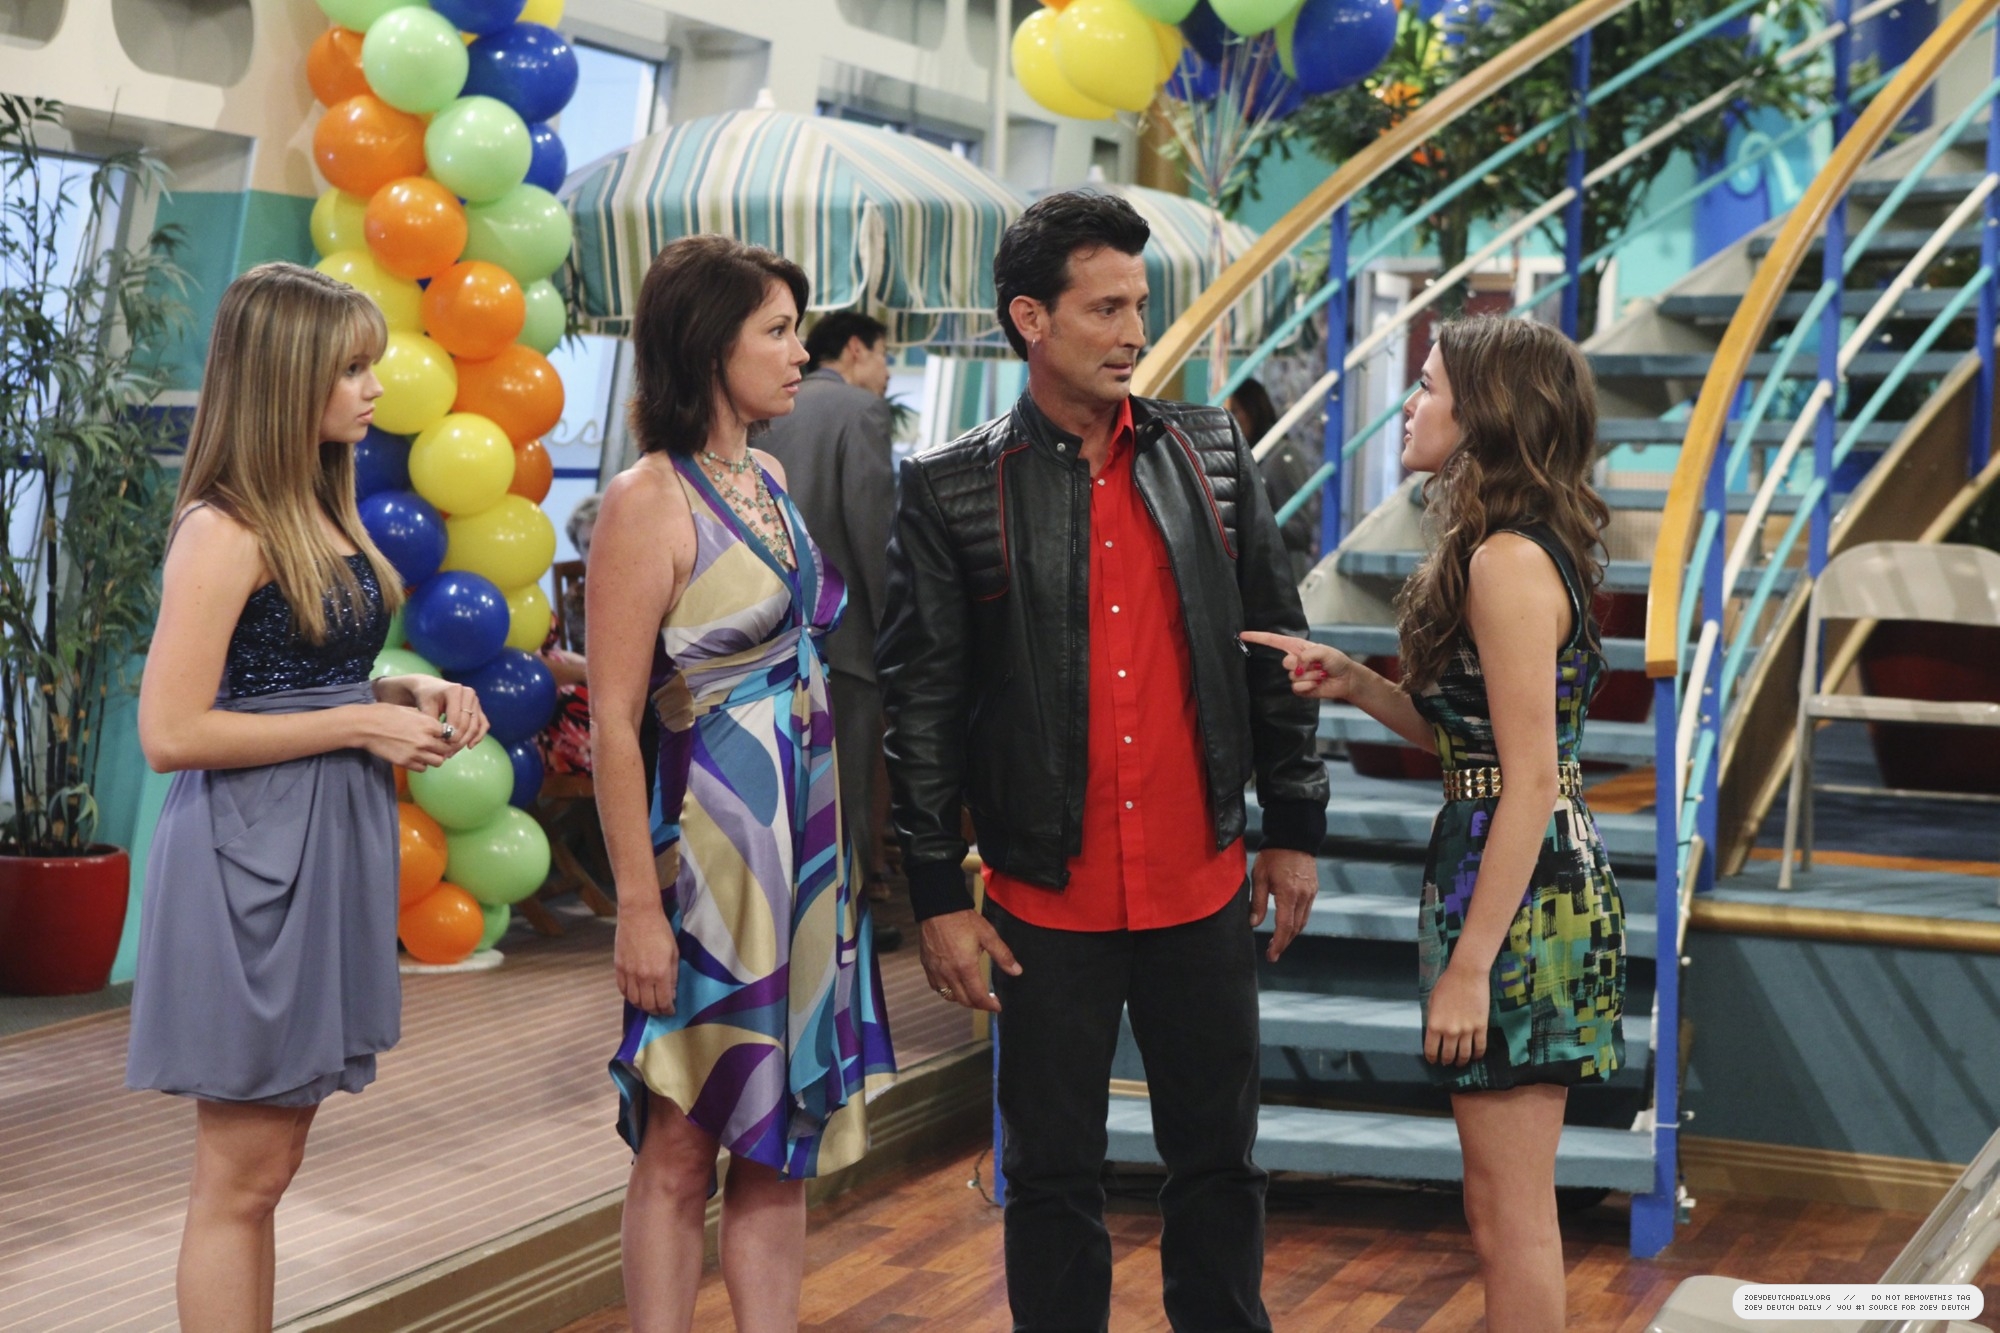 Photo of 'The Suite Life on Deck' stills: 3x22 Graduation on Deck...